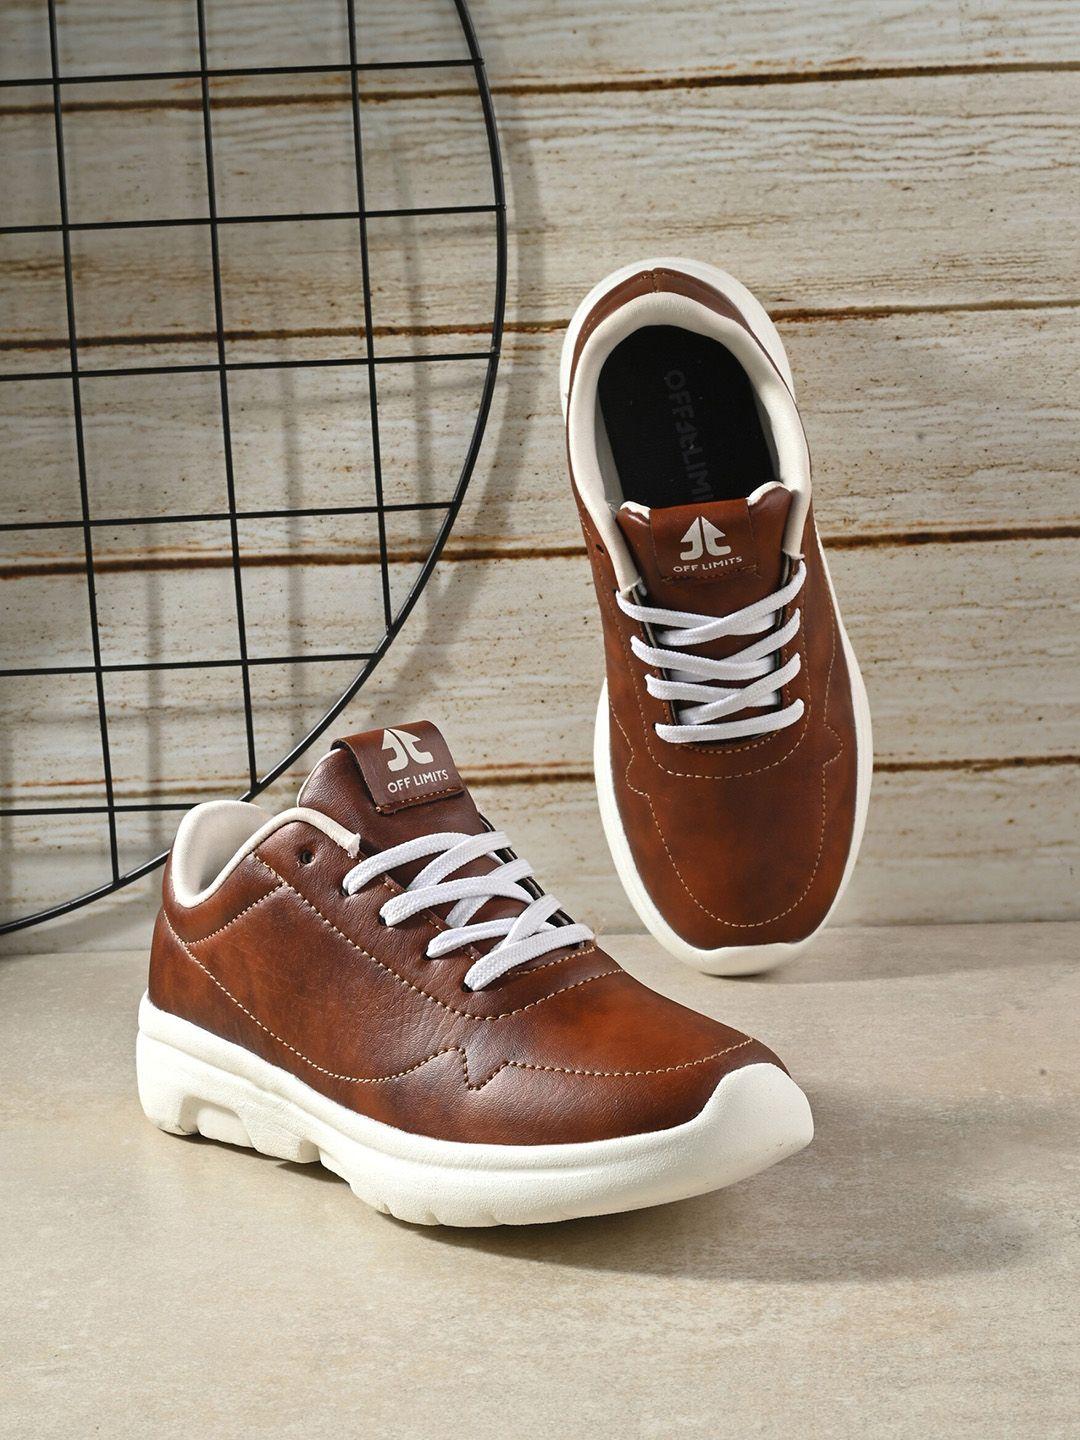 off limits boys lightweight contrast sole sneakers